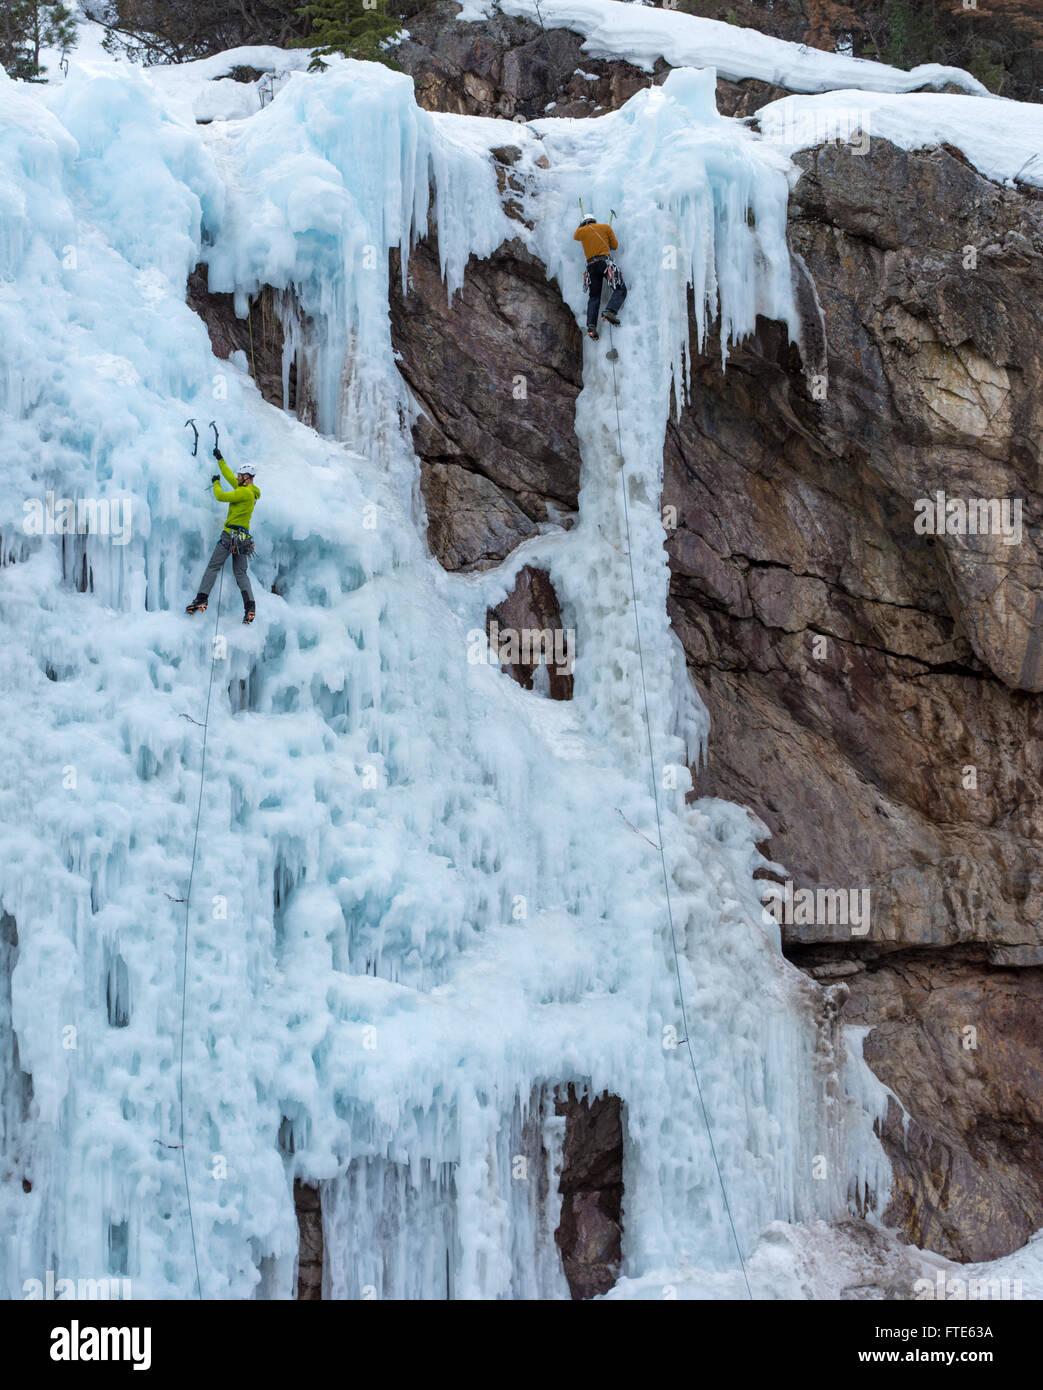 Ice climbers climb routes called 'We're Number One' and 'Up Yours' rated WI5 in the Ouray Colorado Stock Photo